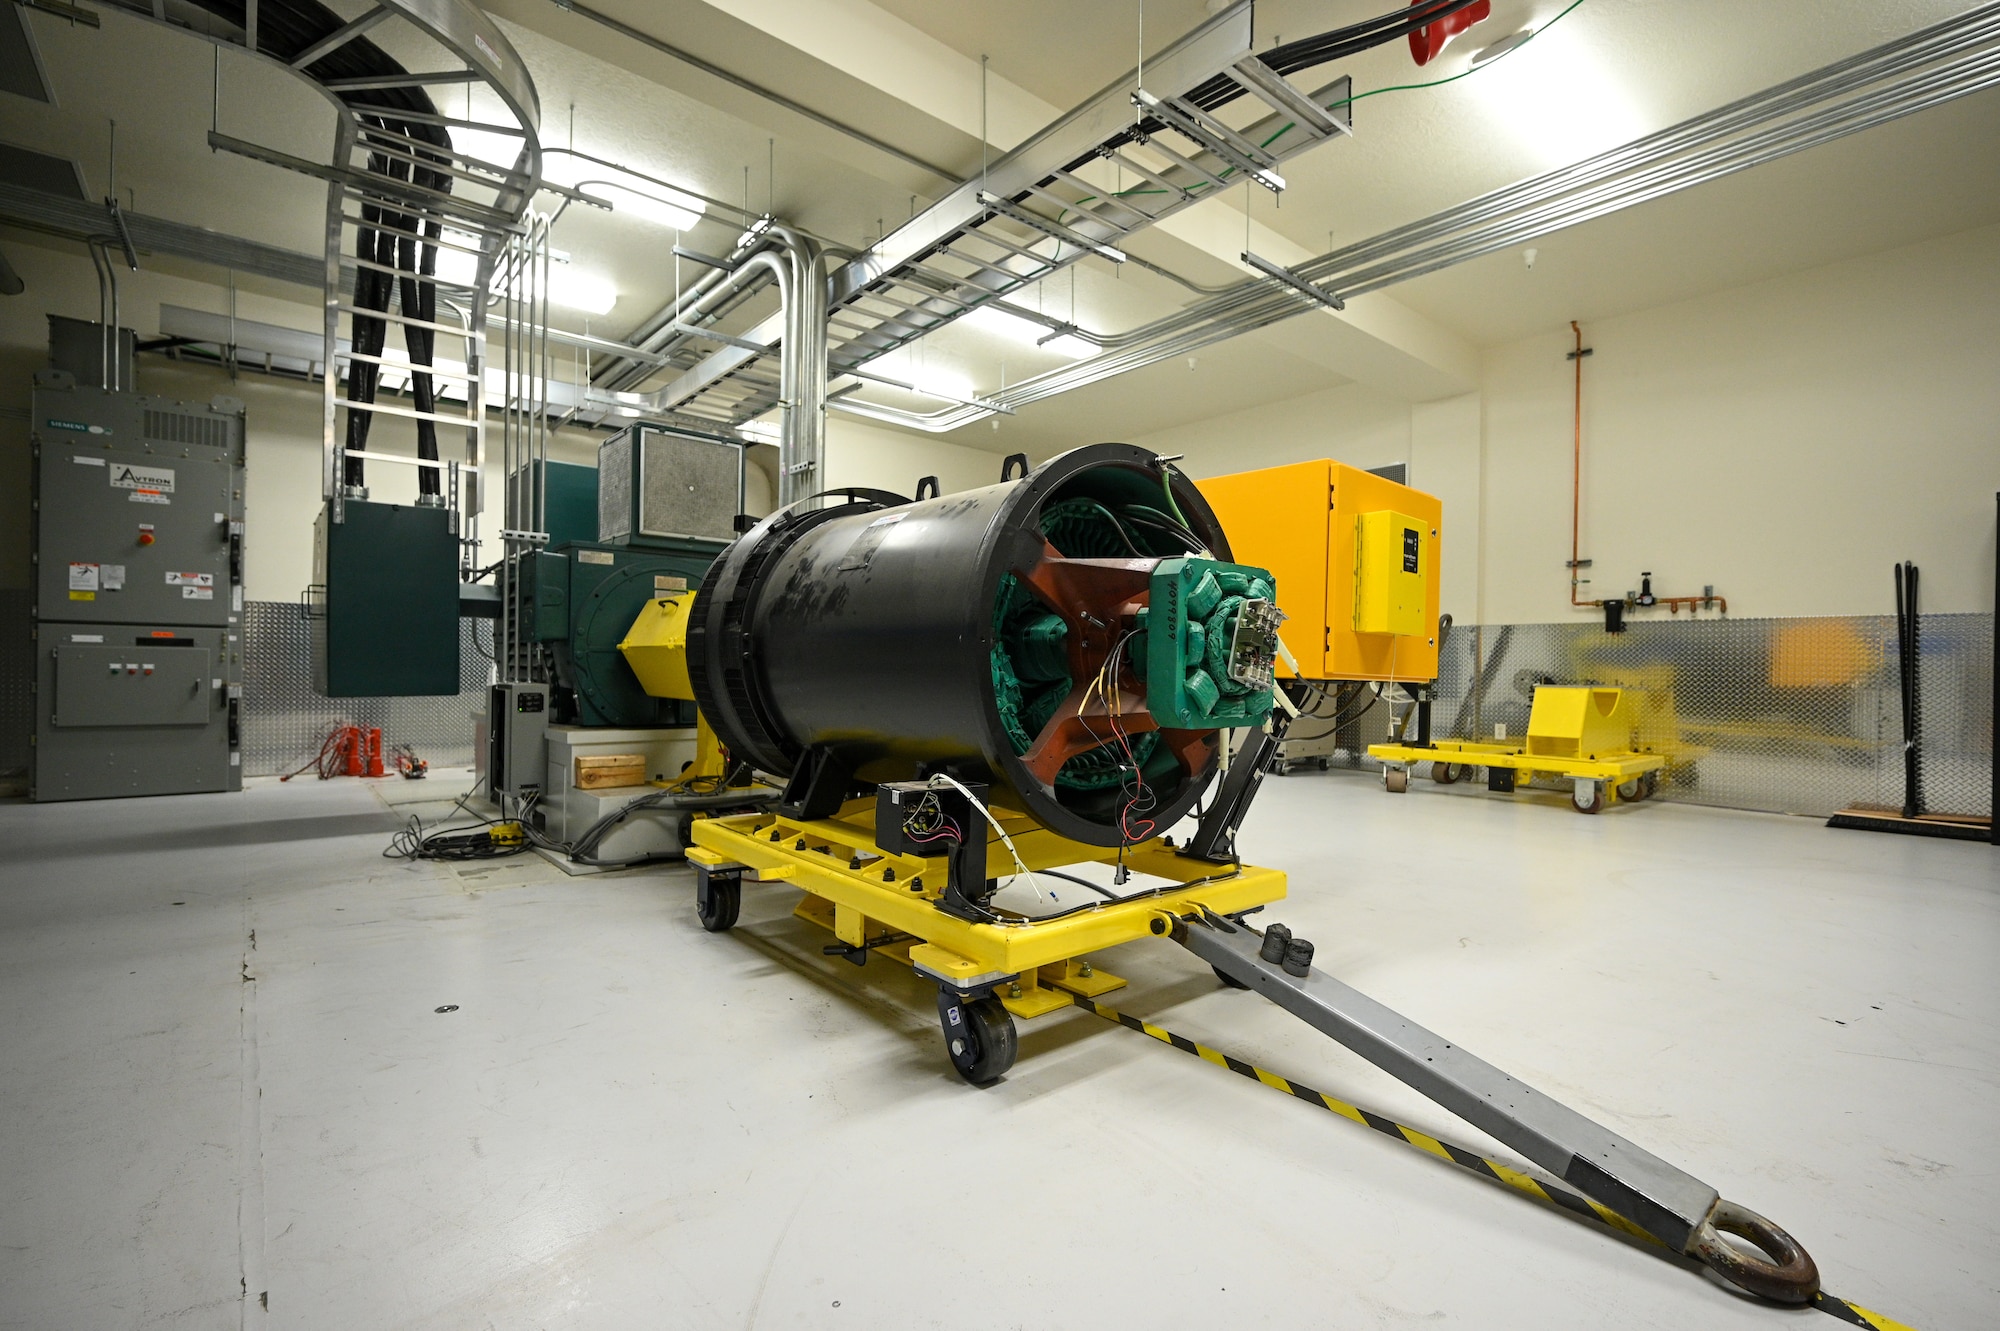 The generator for a Base Expeditionary Airfield Resources (BEAR) power unit sits inside a newly designed test facility at Hill Air Force Base, Utah, April 26, 2022. The 526th EMXS activated a new maintenance workload on BEAR units after successfully testing the unit's first repaired asset. BEAR power units are used to power U.S. Air Force forward operating bases. (U.S. Air Force photo by R. Nial Bradshaw)